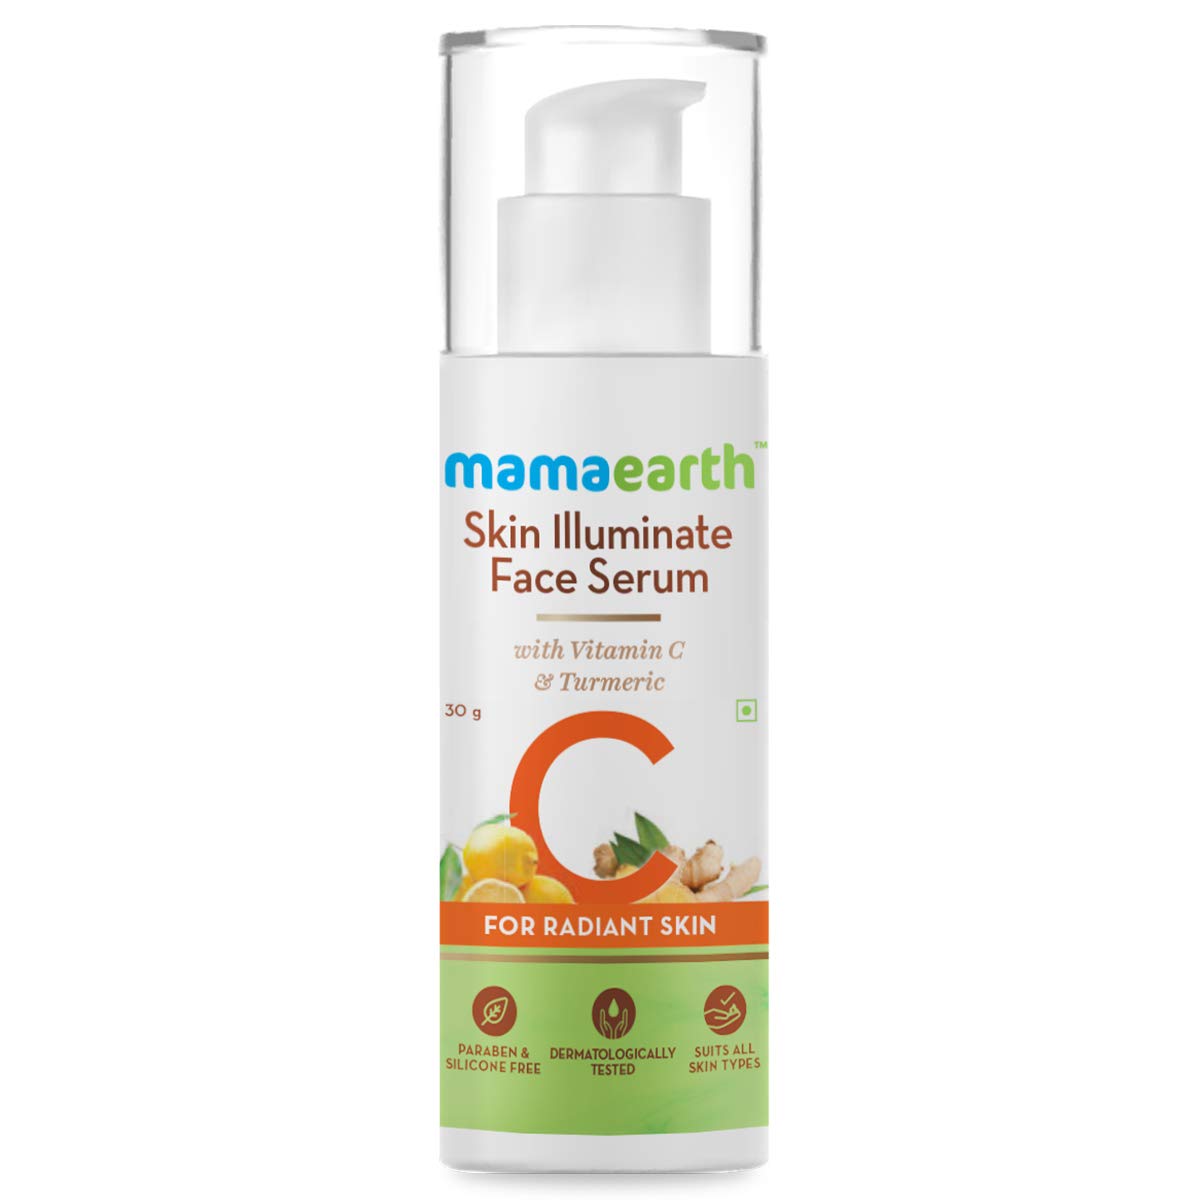 Mamaearth skincare products review